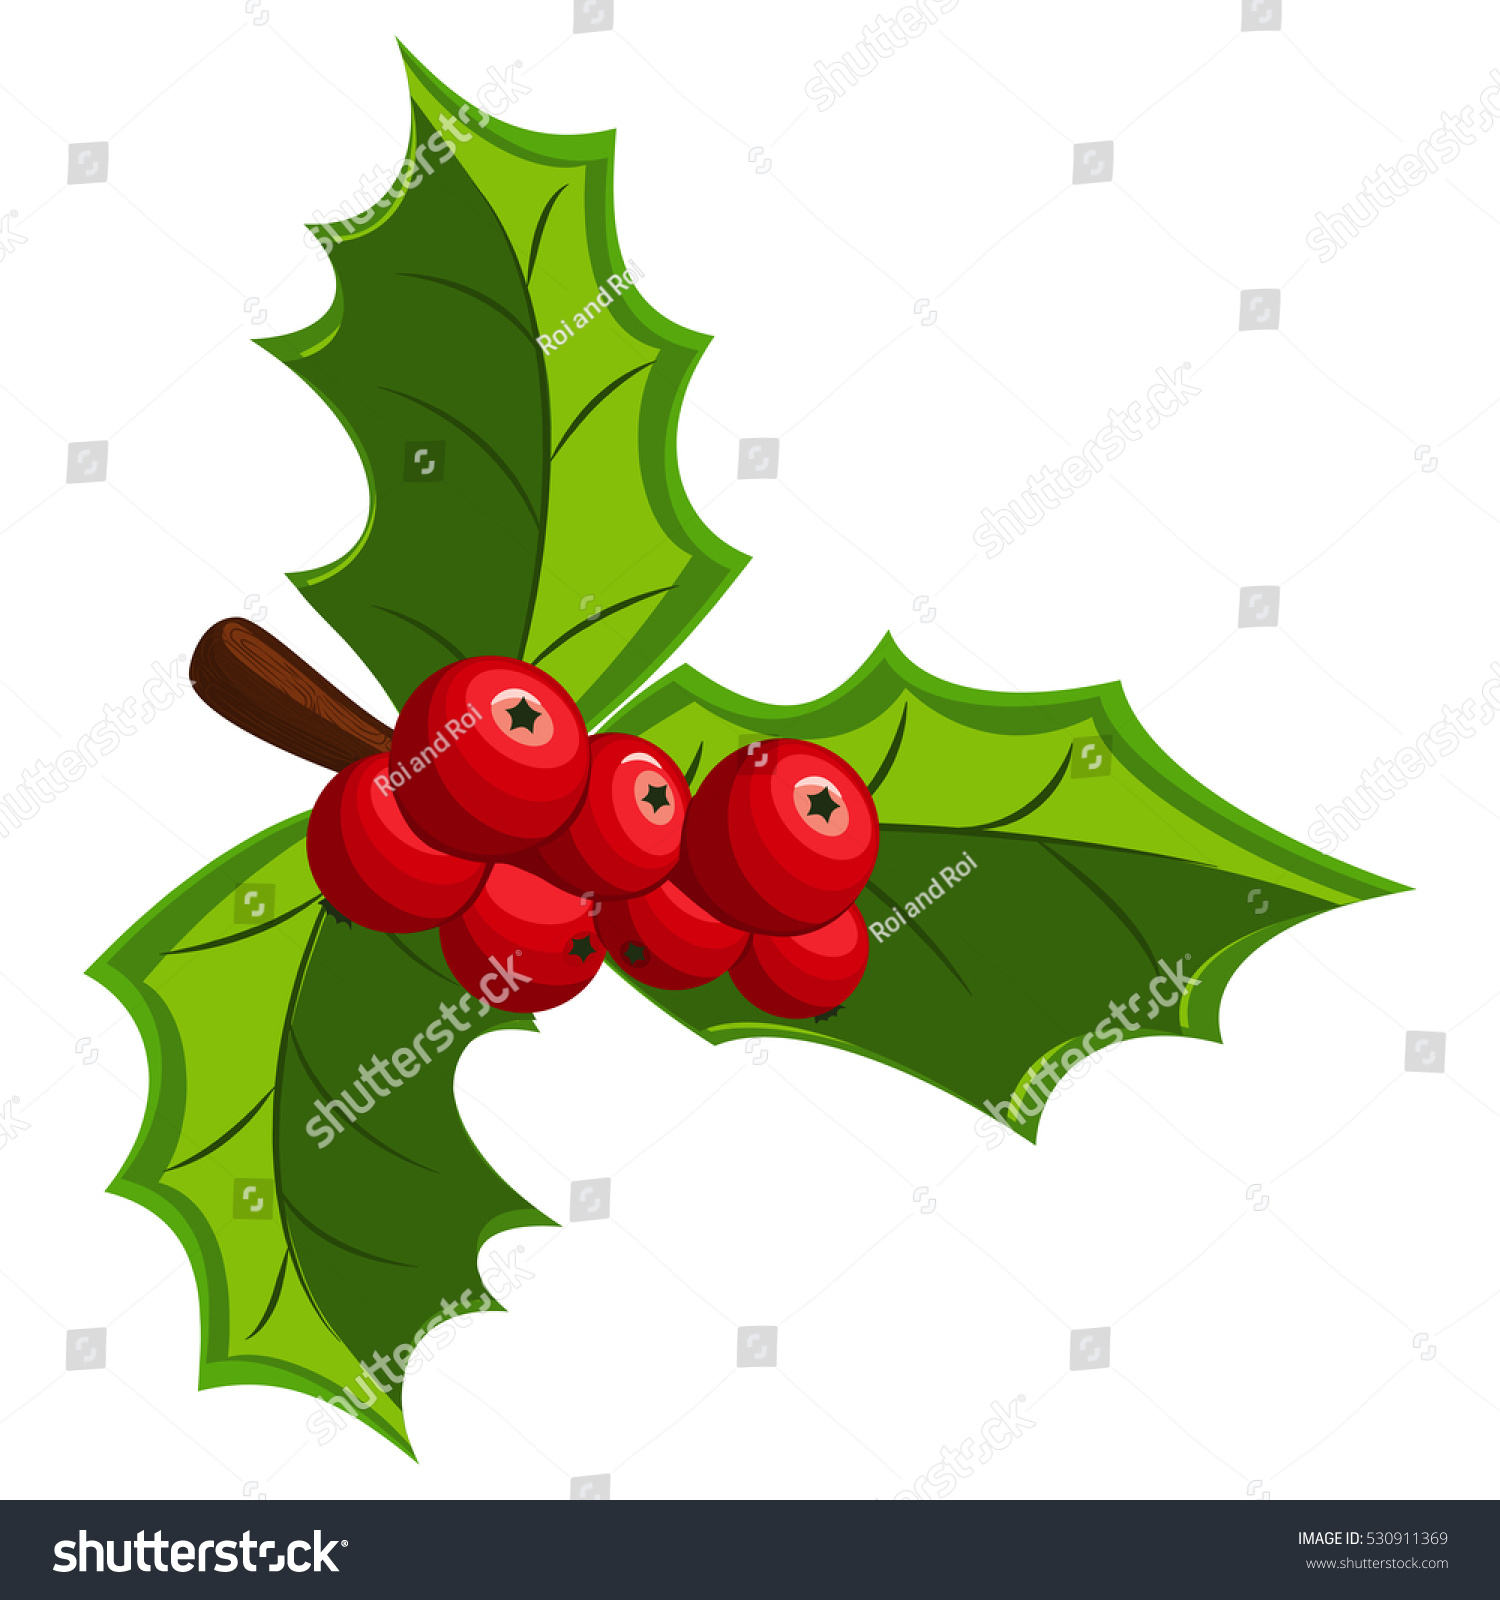 Holly Berry Three Leaves Christmas Symbol Stock Vector 530911369 ...